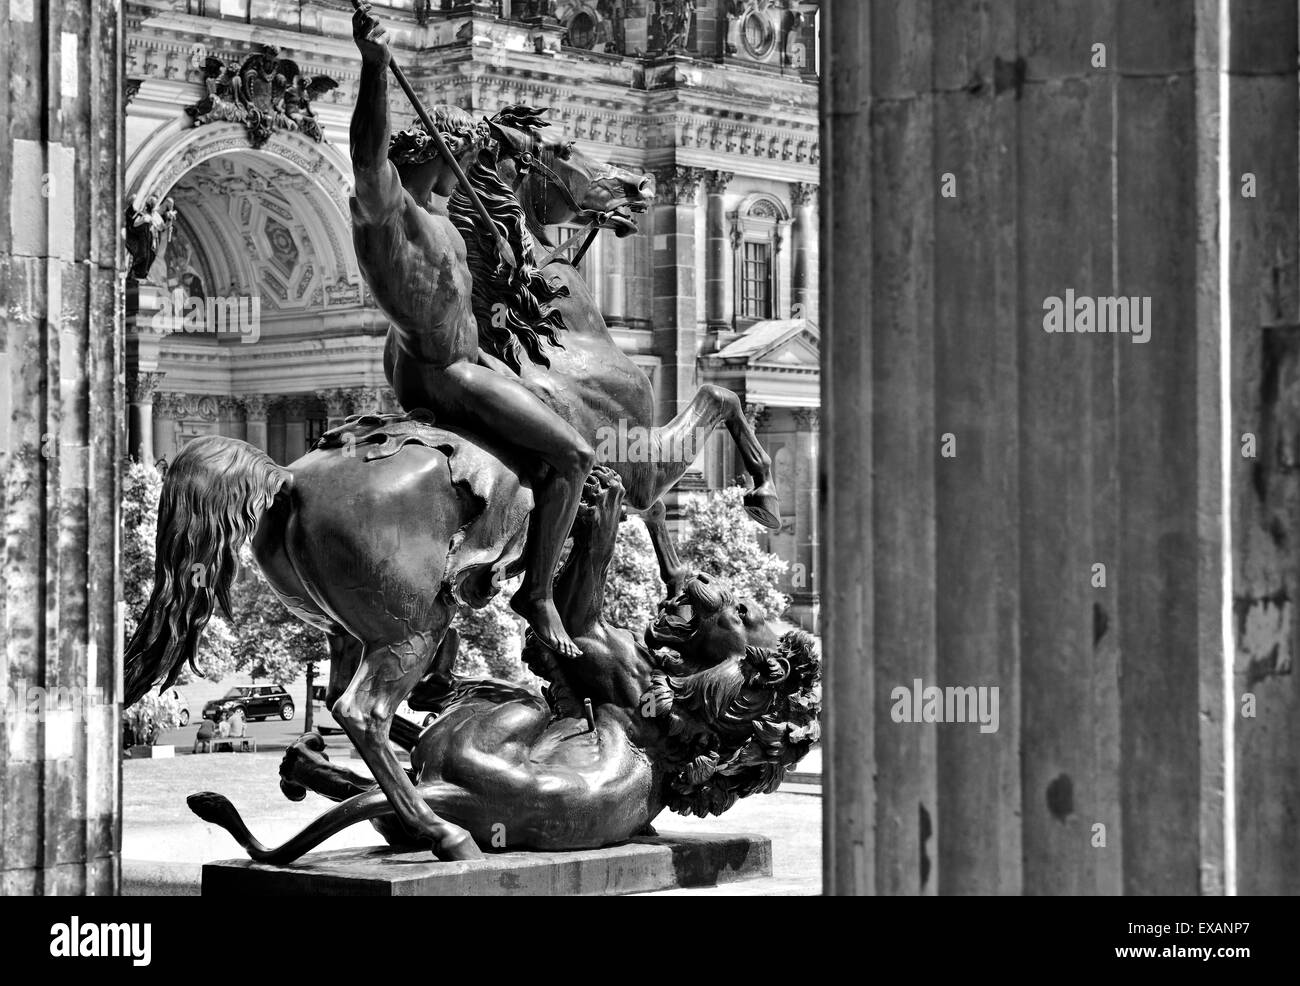 Germany, Berlin: Black and white image of the 'Lion Fighter' sculpture at the Old Museum Stock Photo